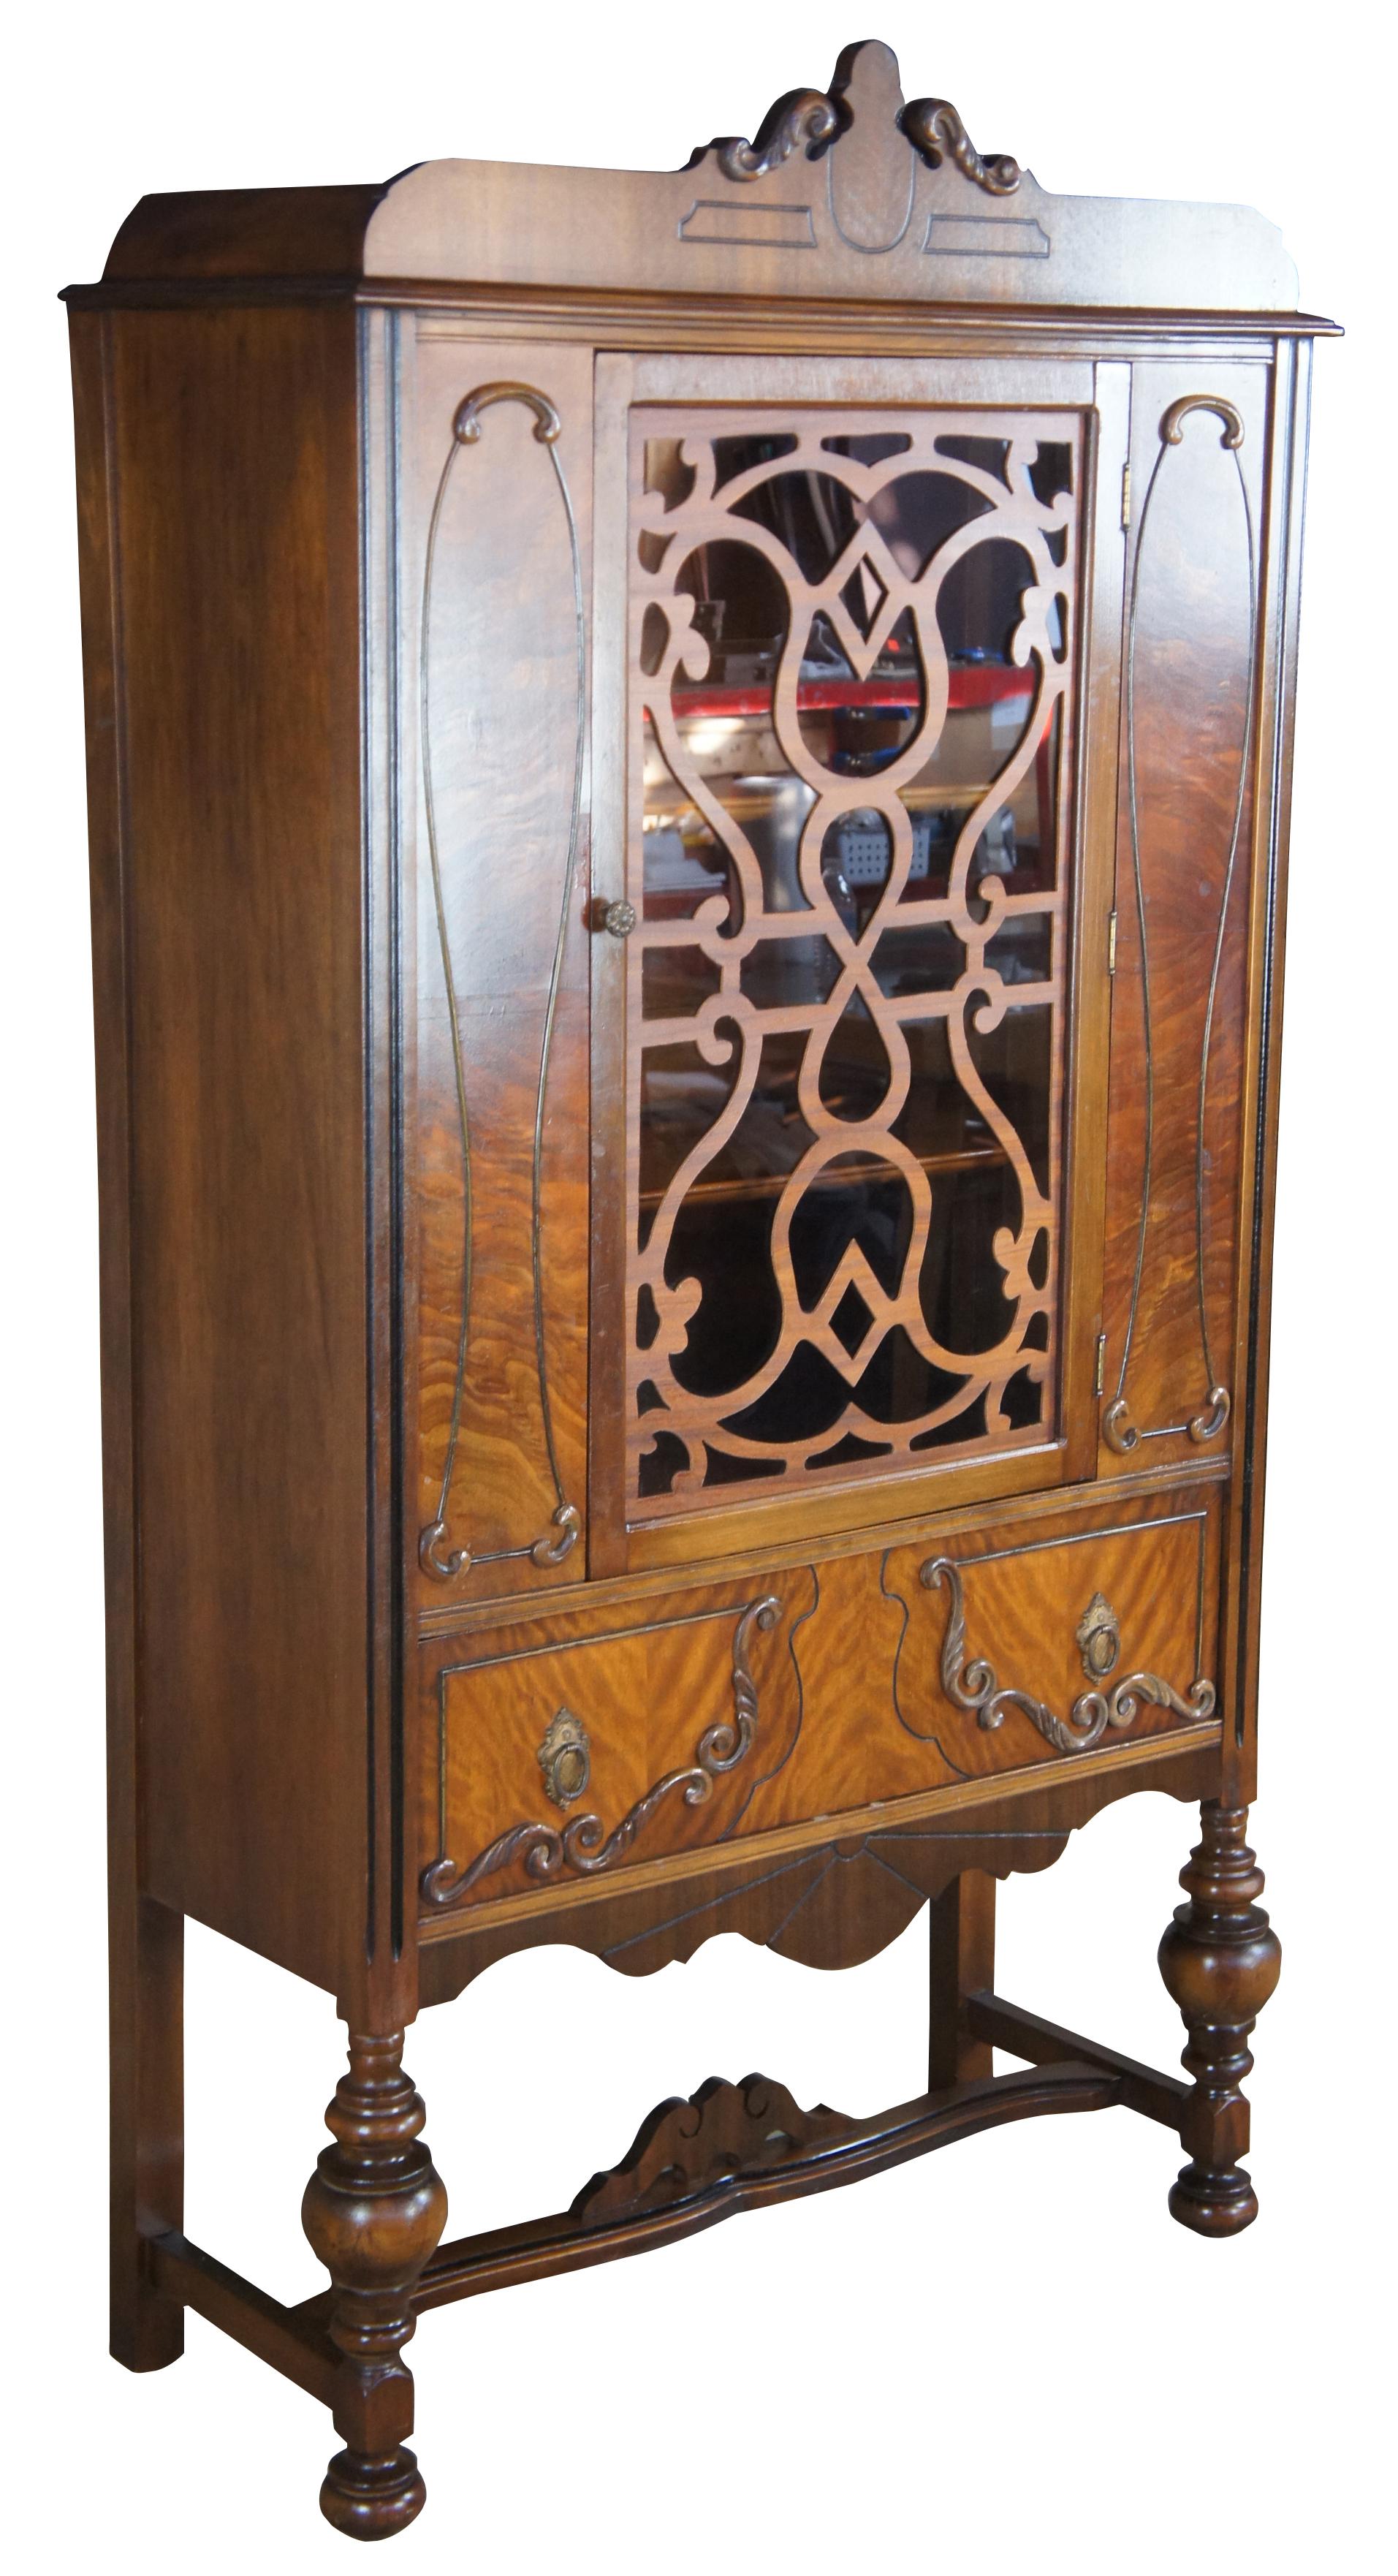 Early 20th century Jacobean style china cabinet. Made from walnut with a burled front. Features two shelves concealed by a large central door lined with fretwork over dovetailed silverware drawer. Includes a serpentine crown and lower apron. The